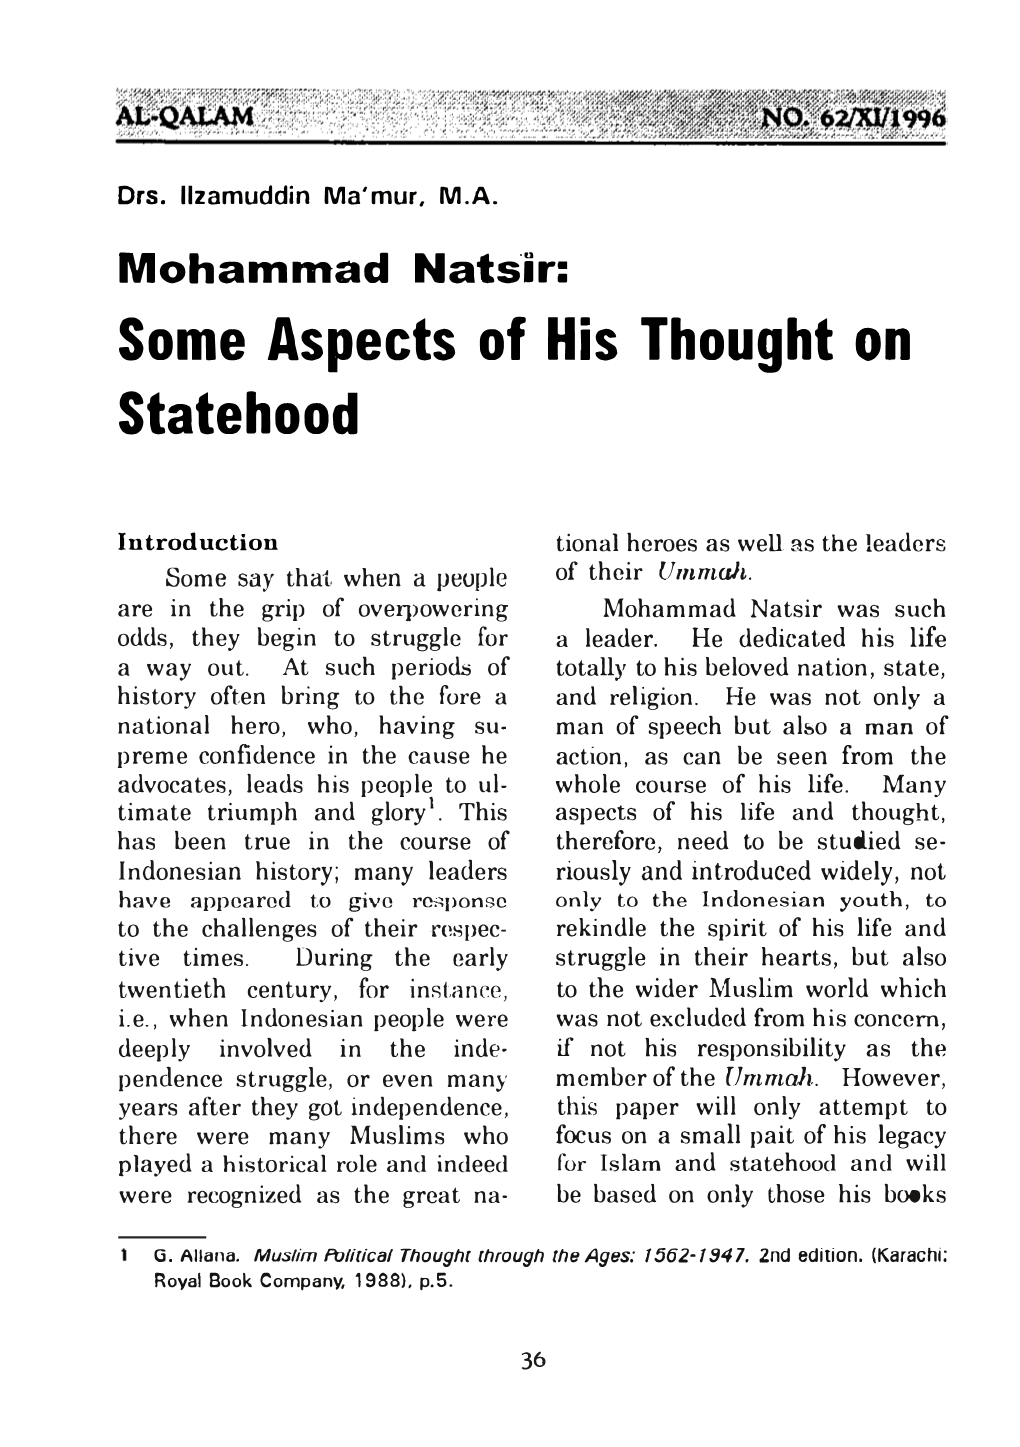 Some Aspects of His Thought on Statehood